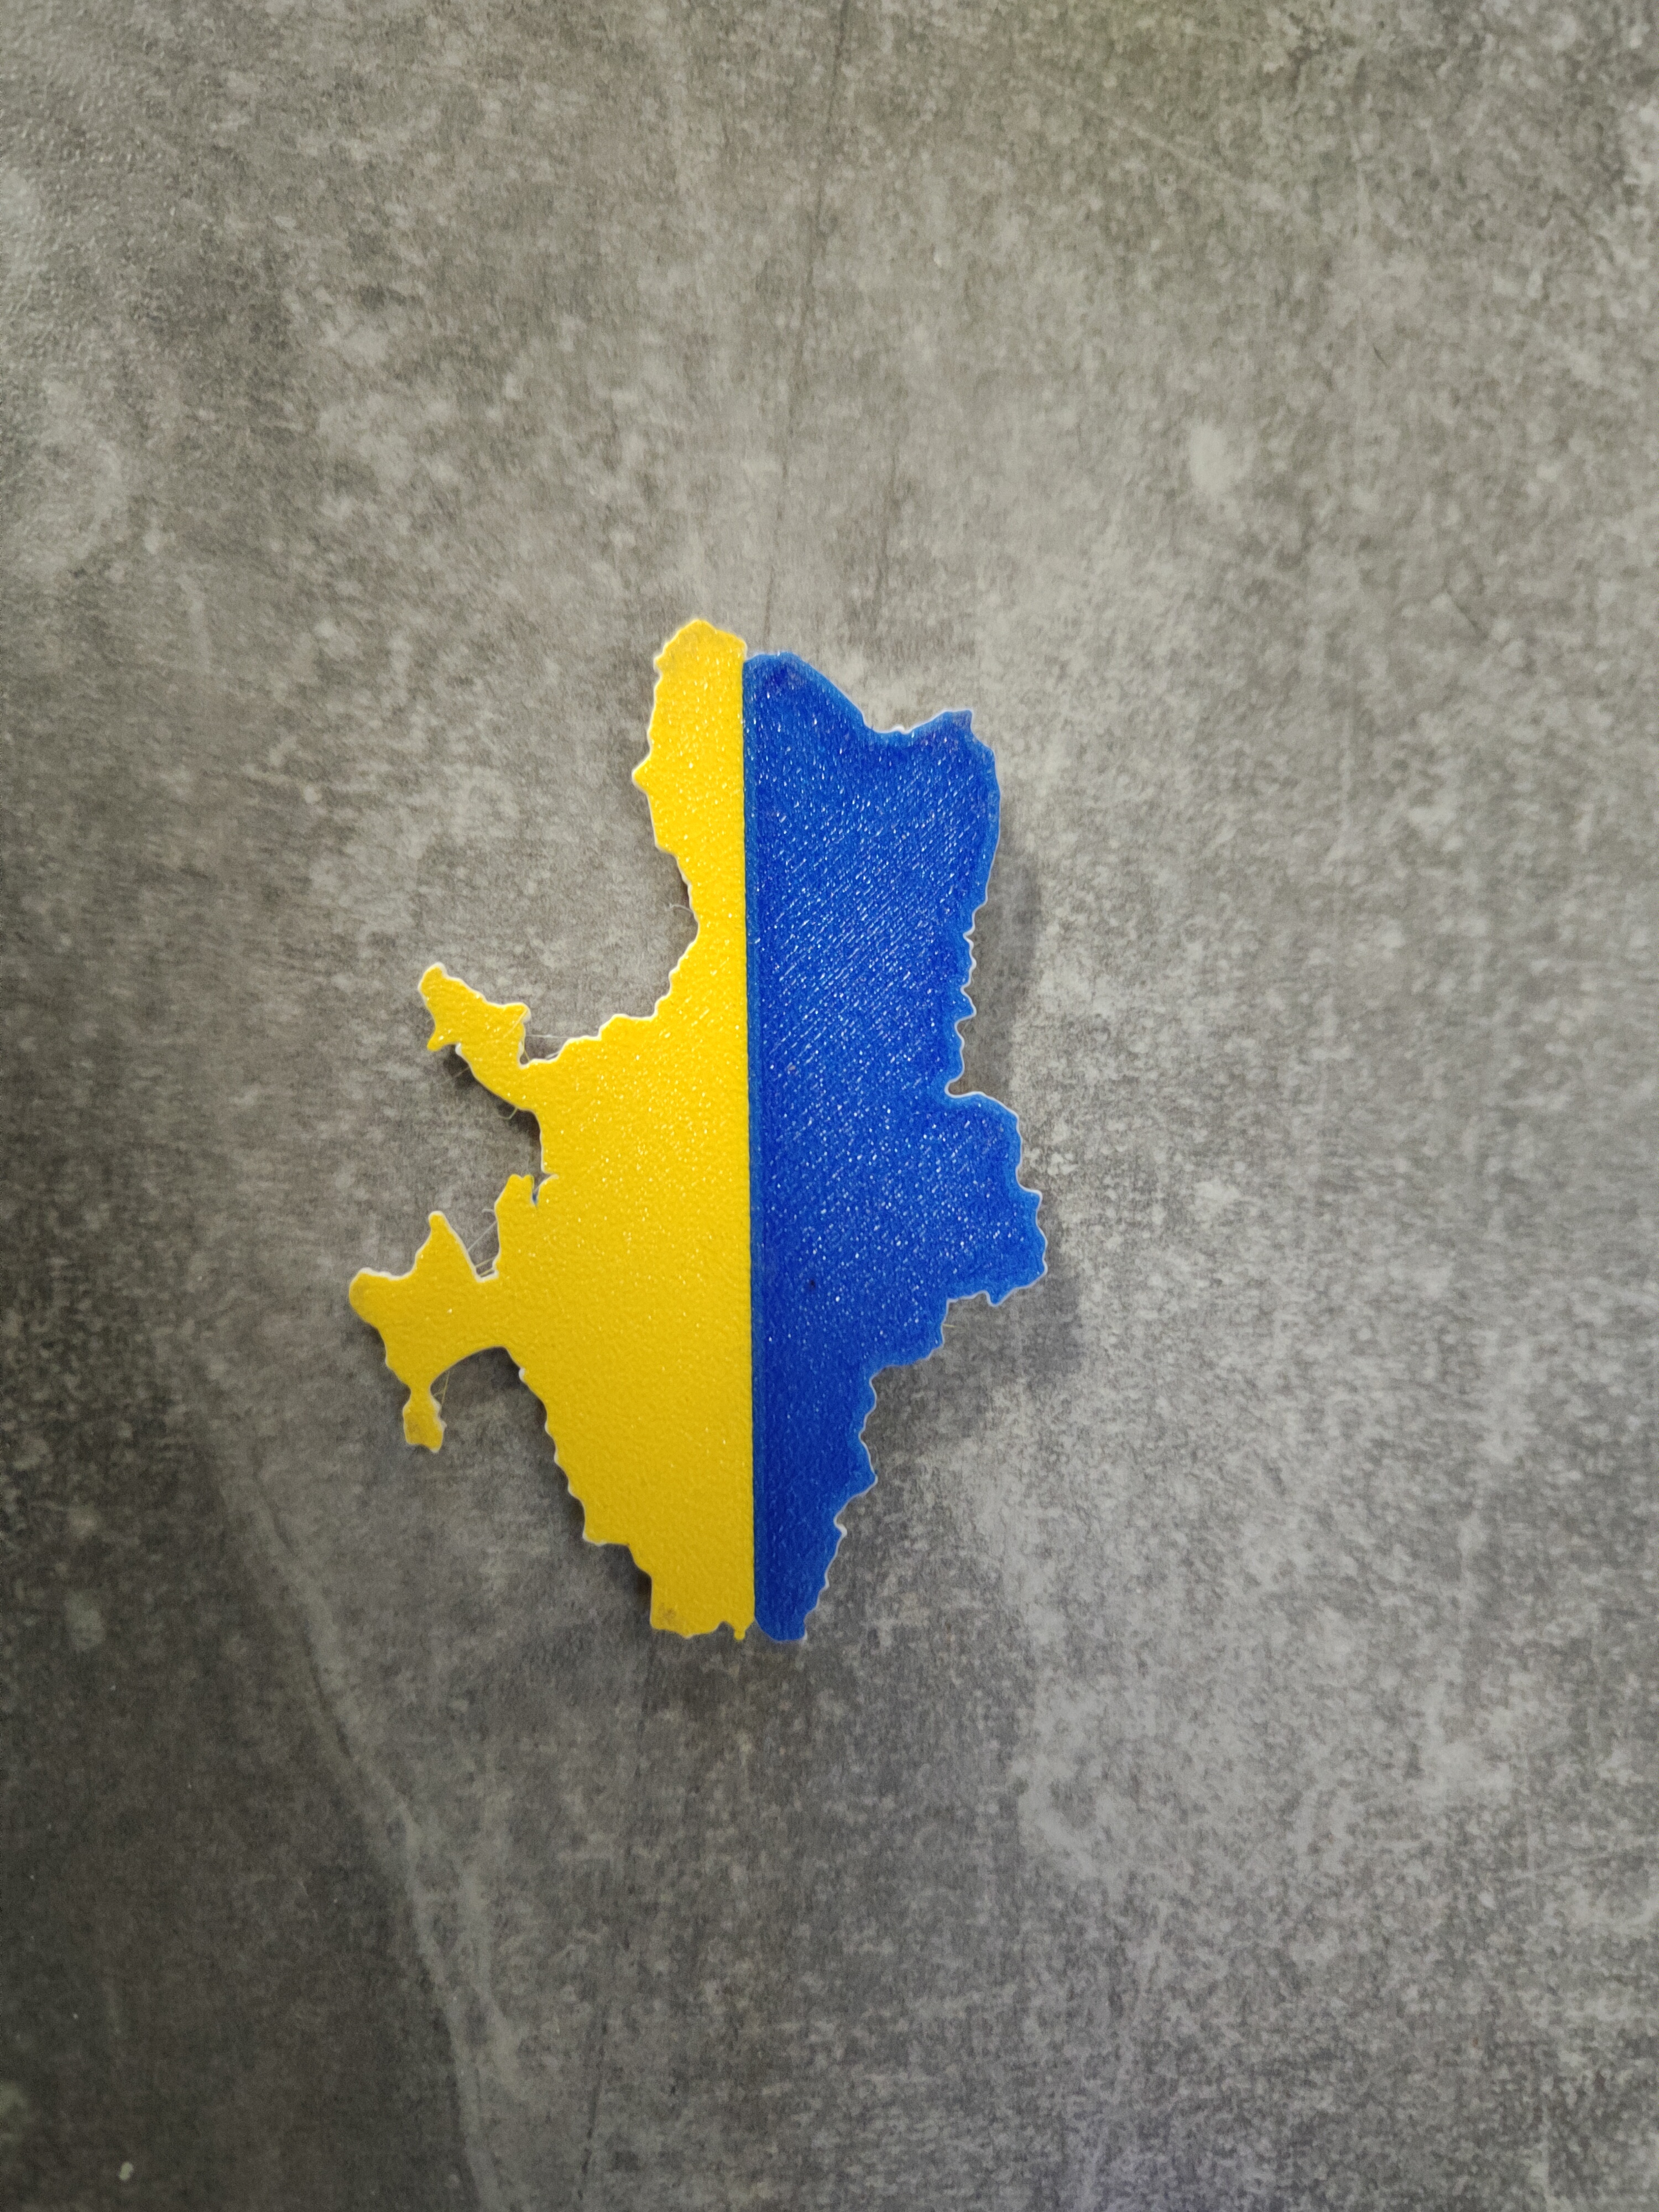 High detailed single-nozzle multicolor badge in the shape of Ukraine